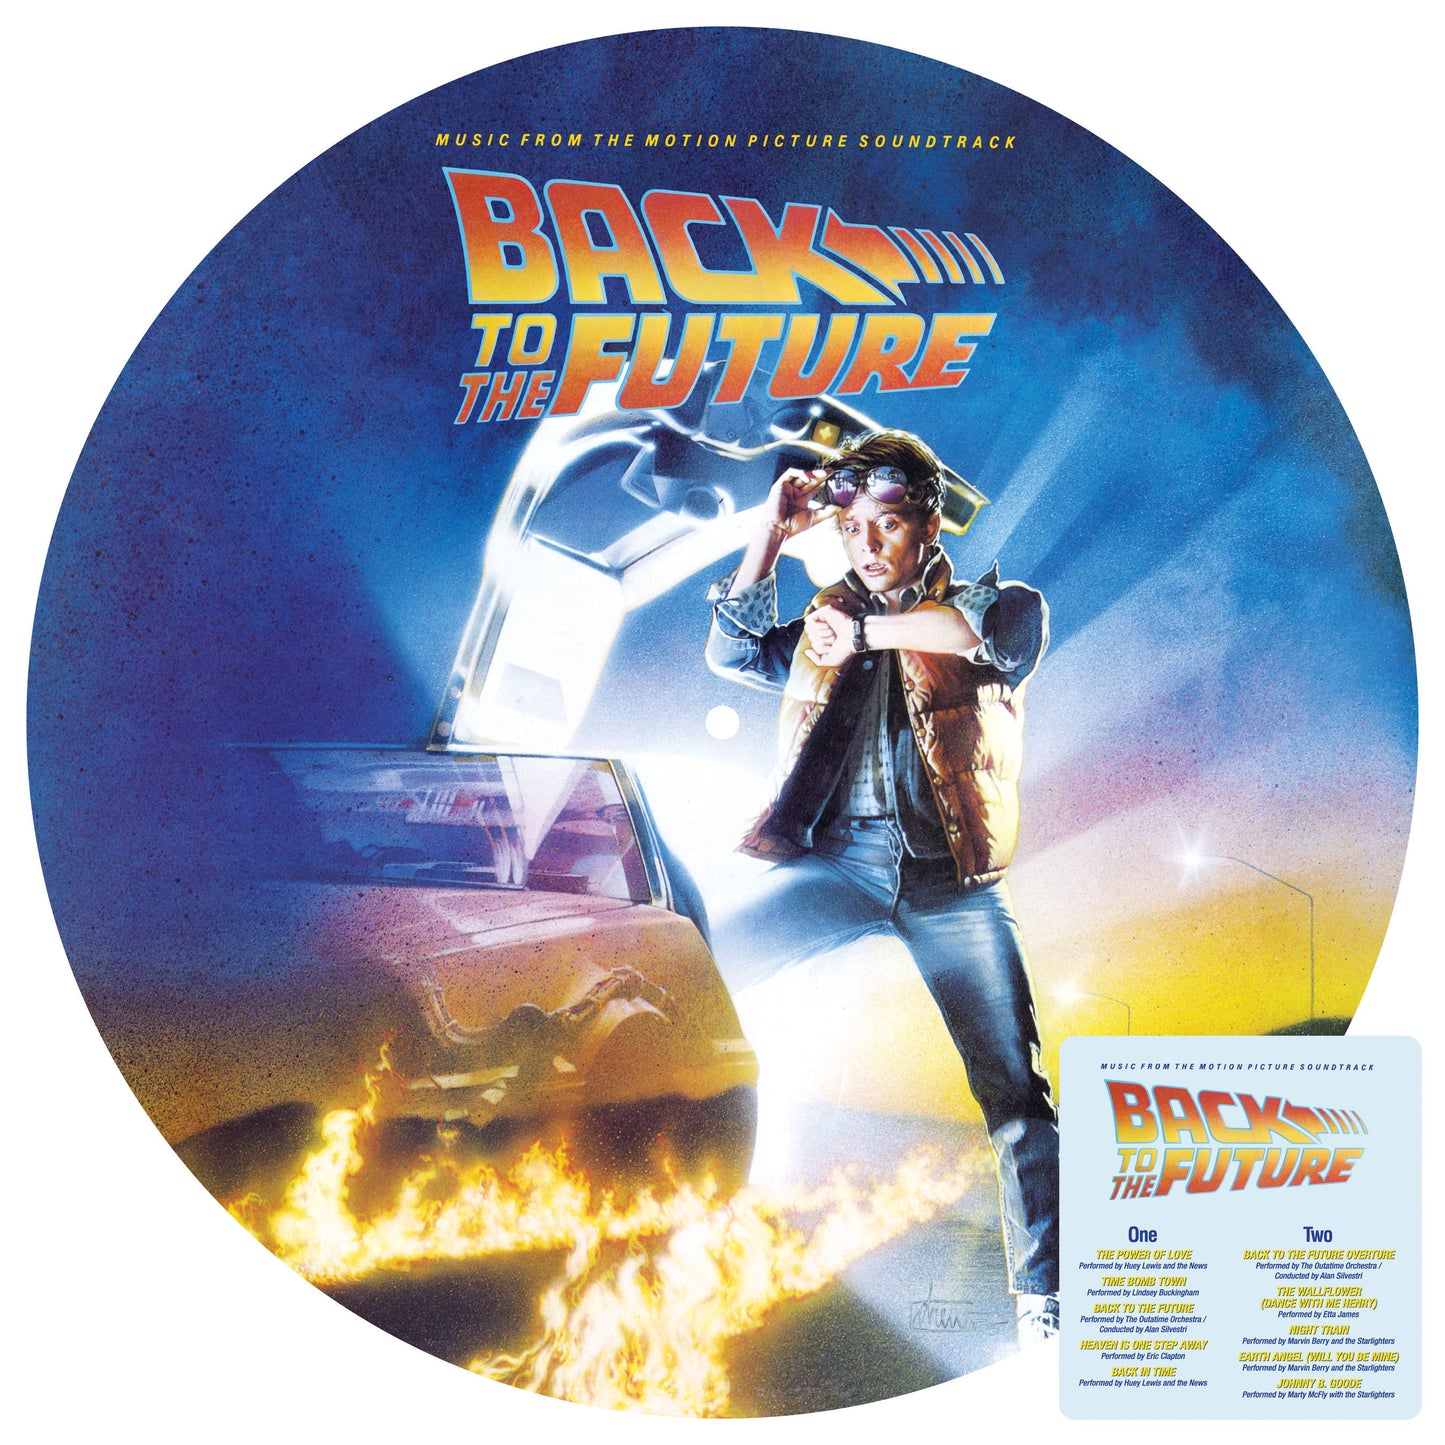 Back To The Future: Music from the Motion Picture Soundtrack (Limited Collectible Picture Disc)